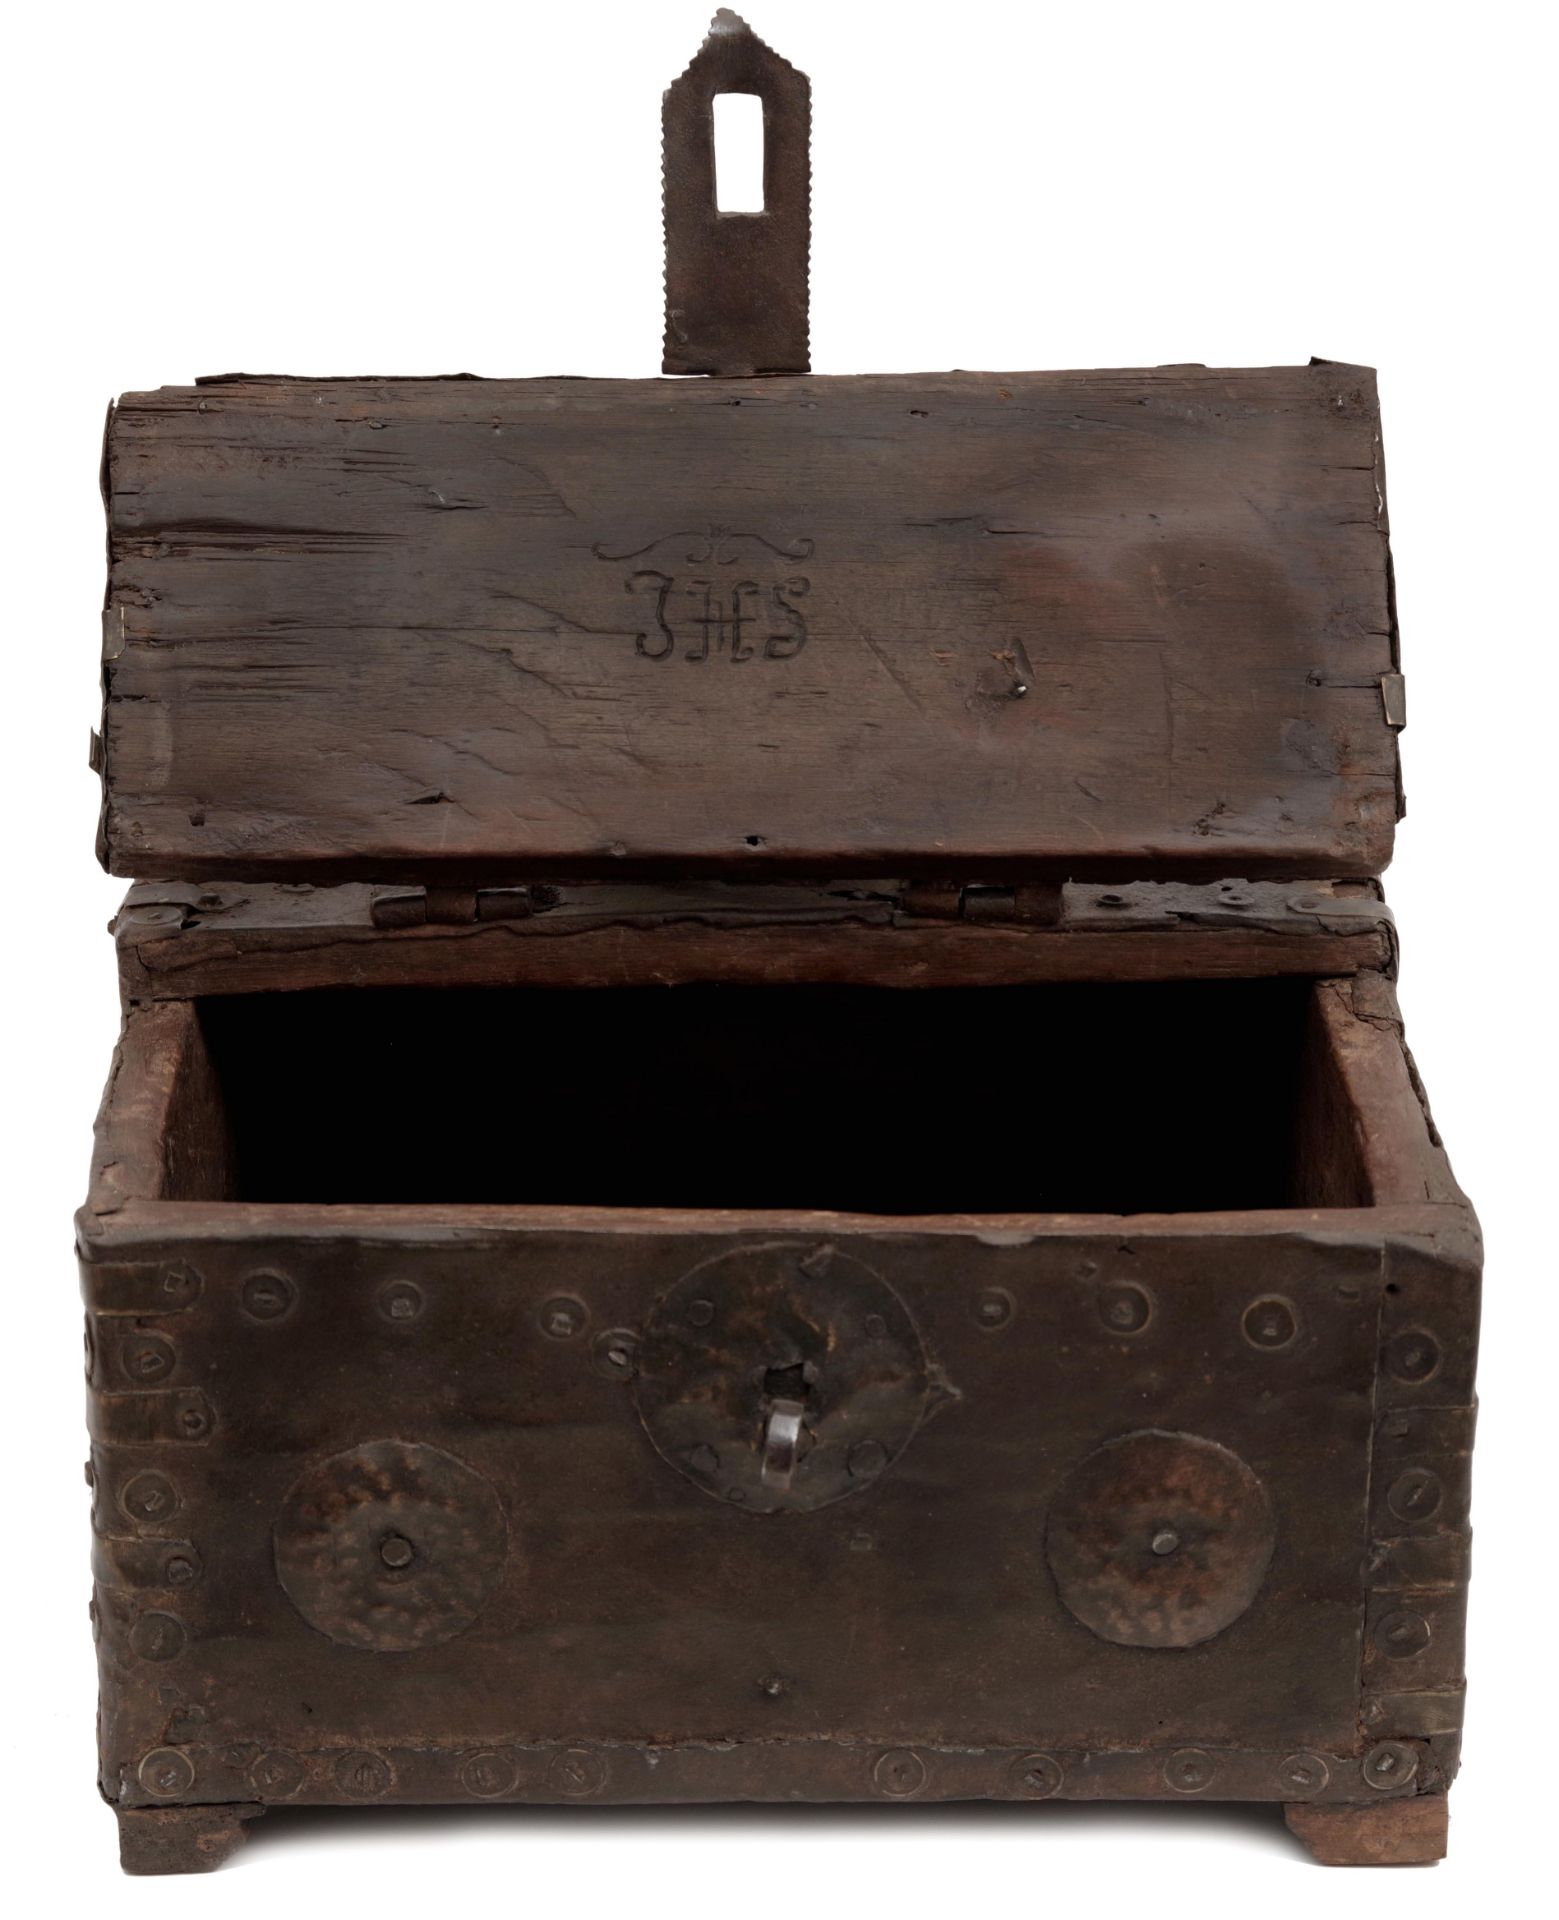 A Dowry Box with Iron Mounts - Image 2 of 4